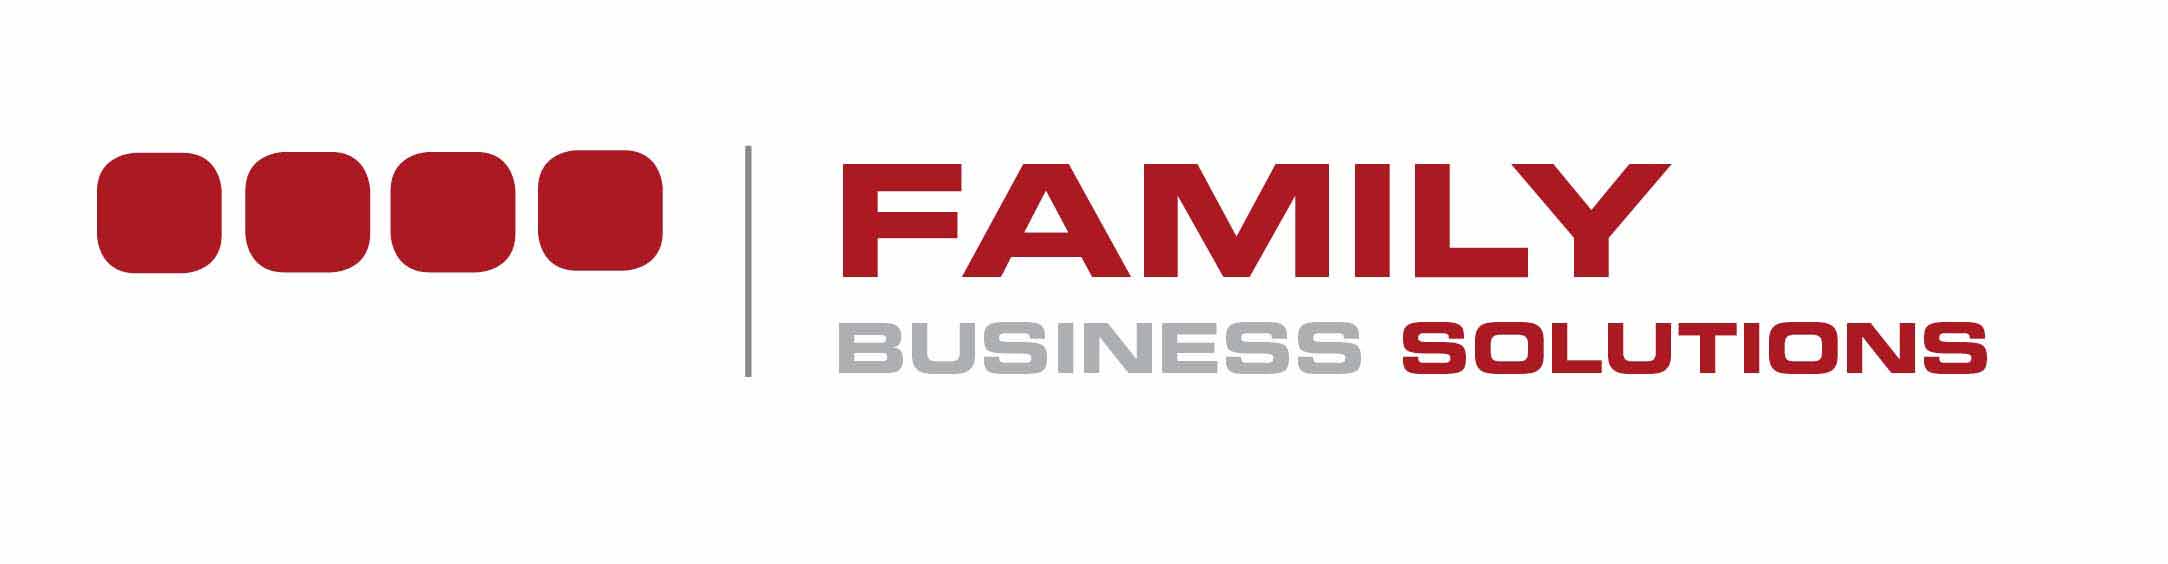 Family Business Solutions